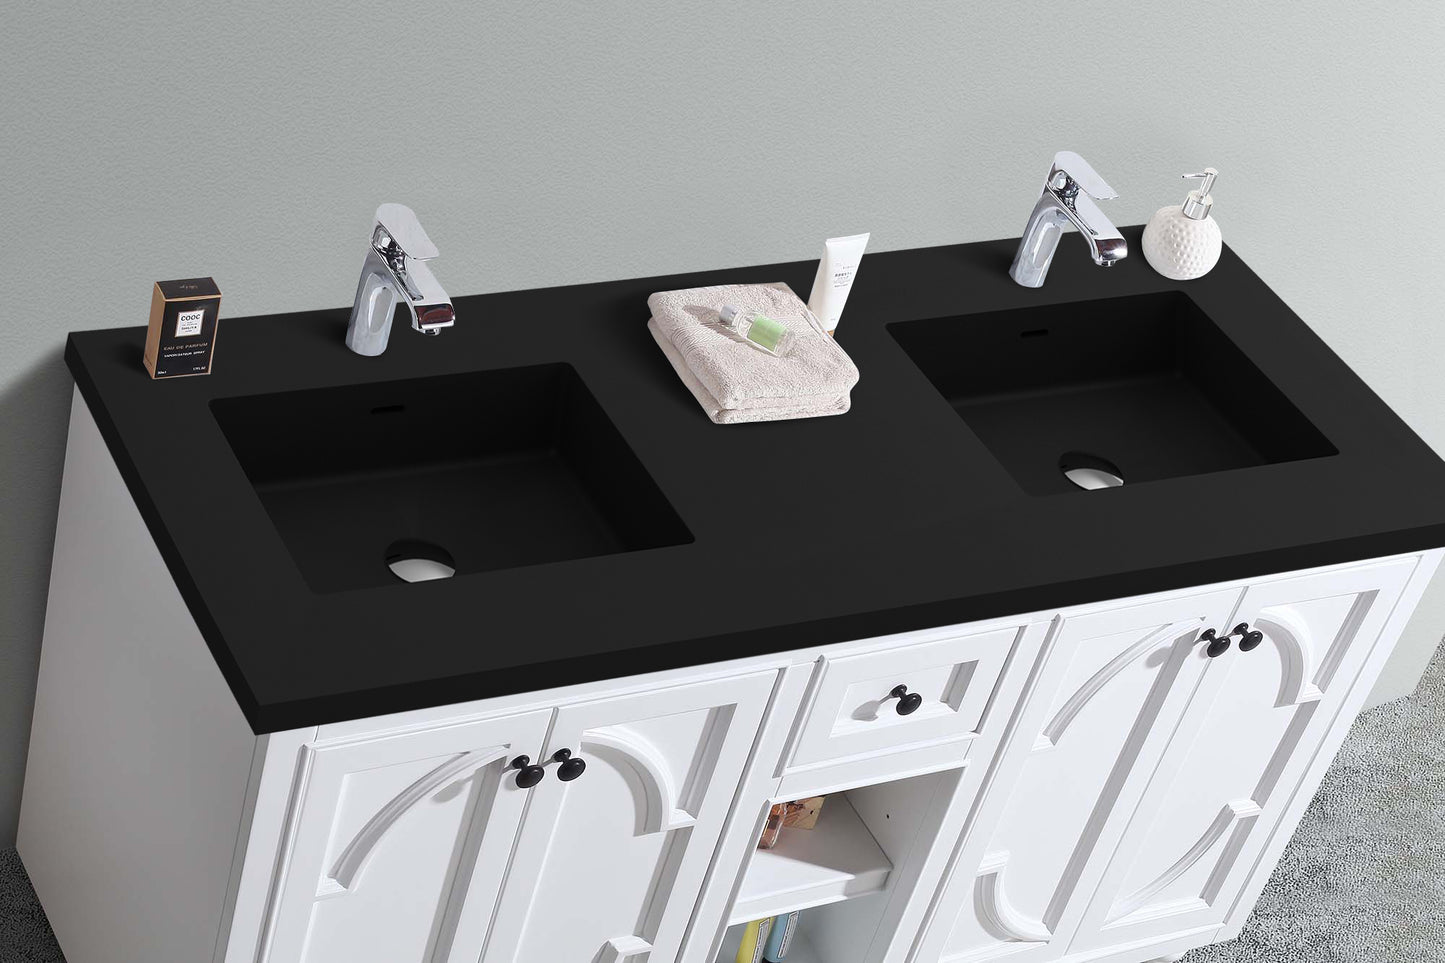 Odyssey 60" White Double Sink Bathroom Vanity with Matte Black VIVA Stone Solid Surface Countertop